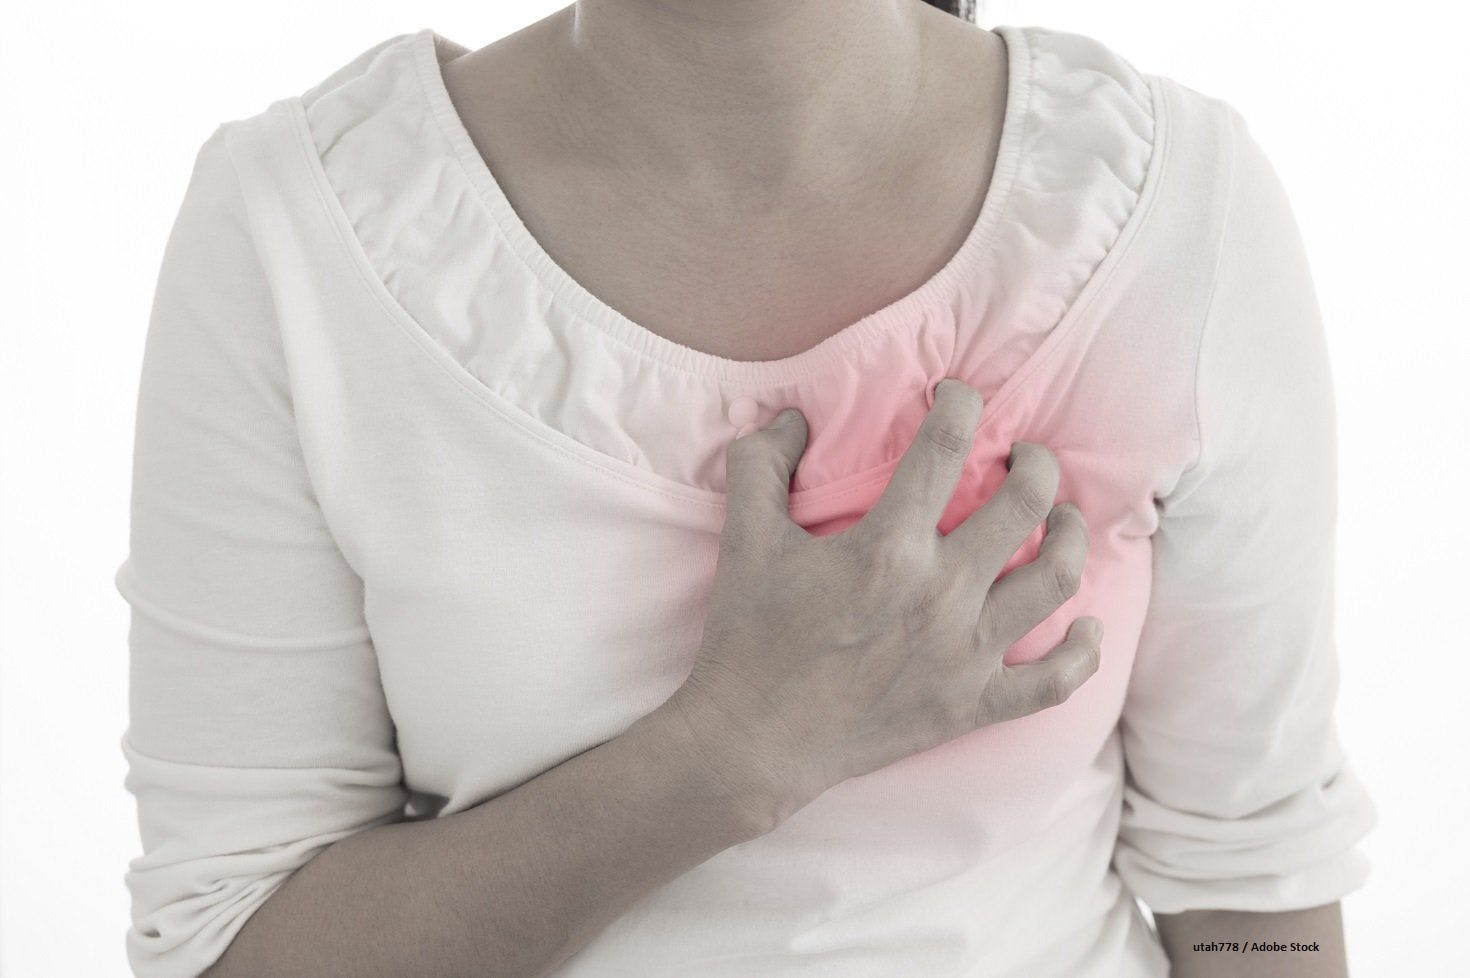 How Do Cardiovascular Risks Change Over Time in Breast Cancer Survivors?